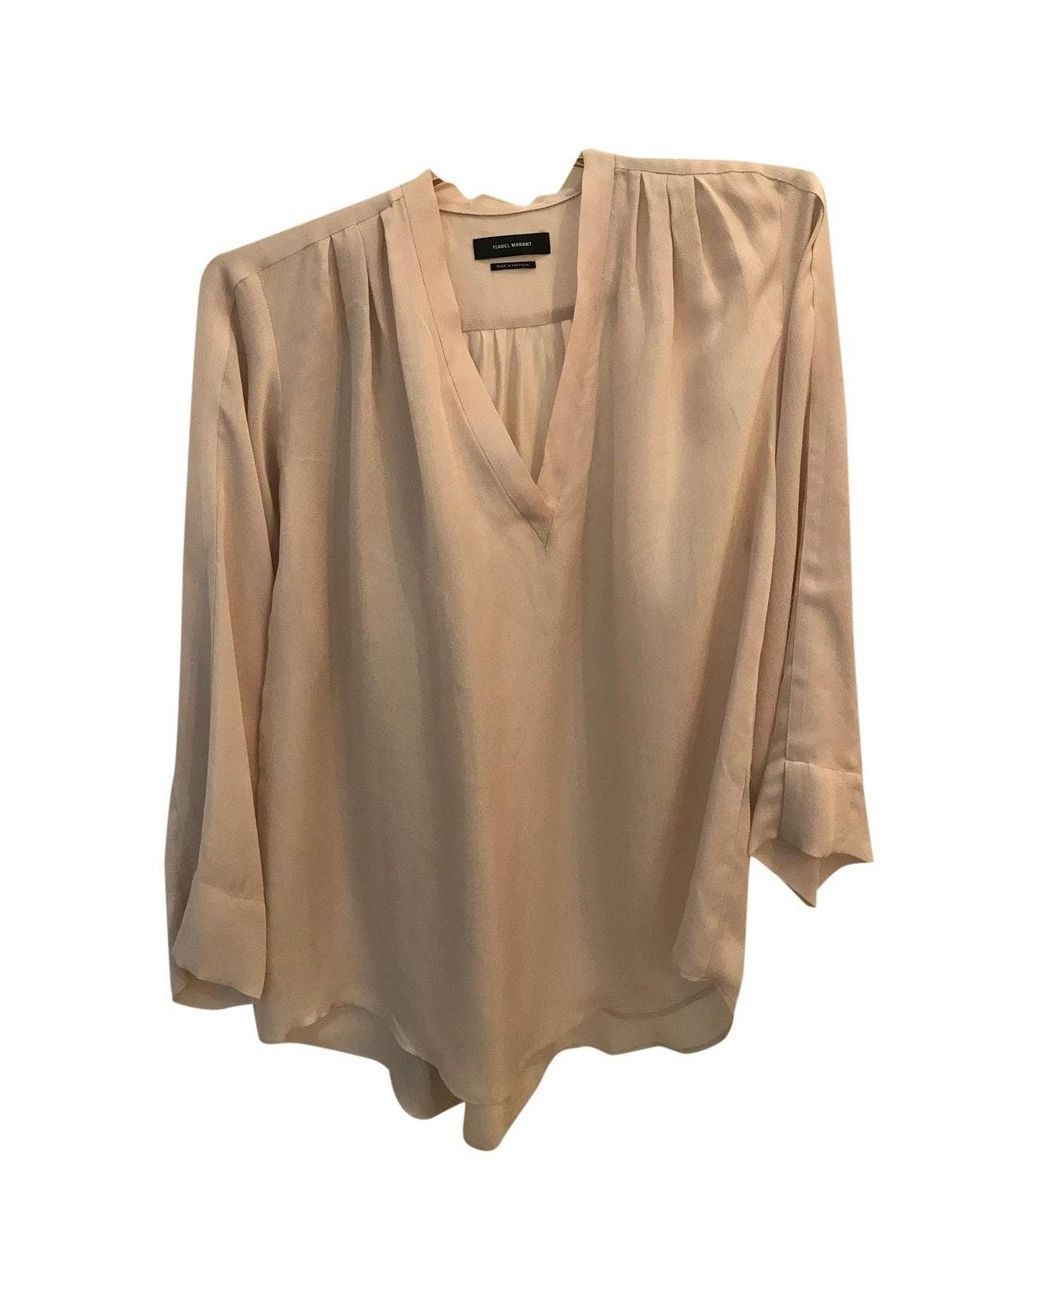 Isabel Marant Silk Blouse in Beige (Natural) - Lyst